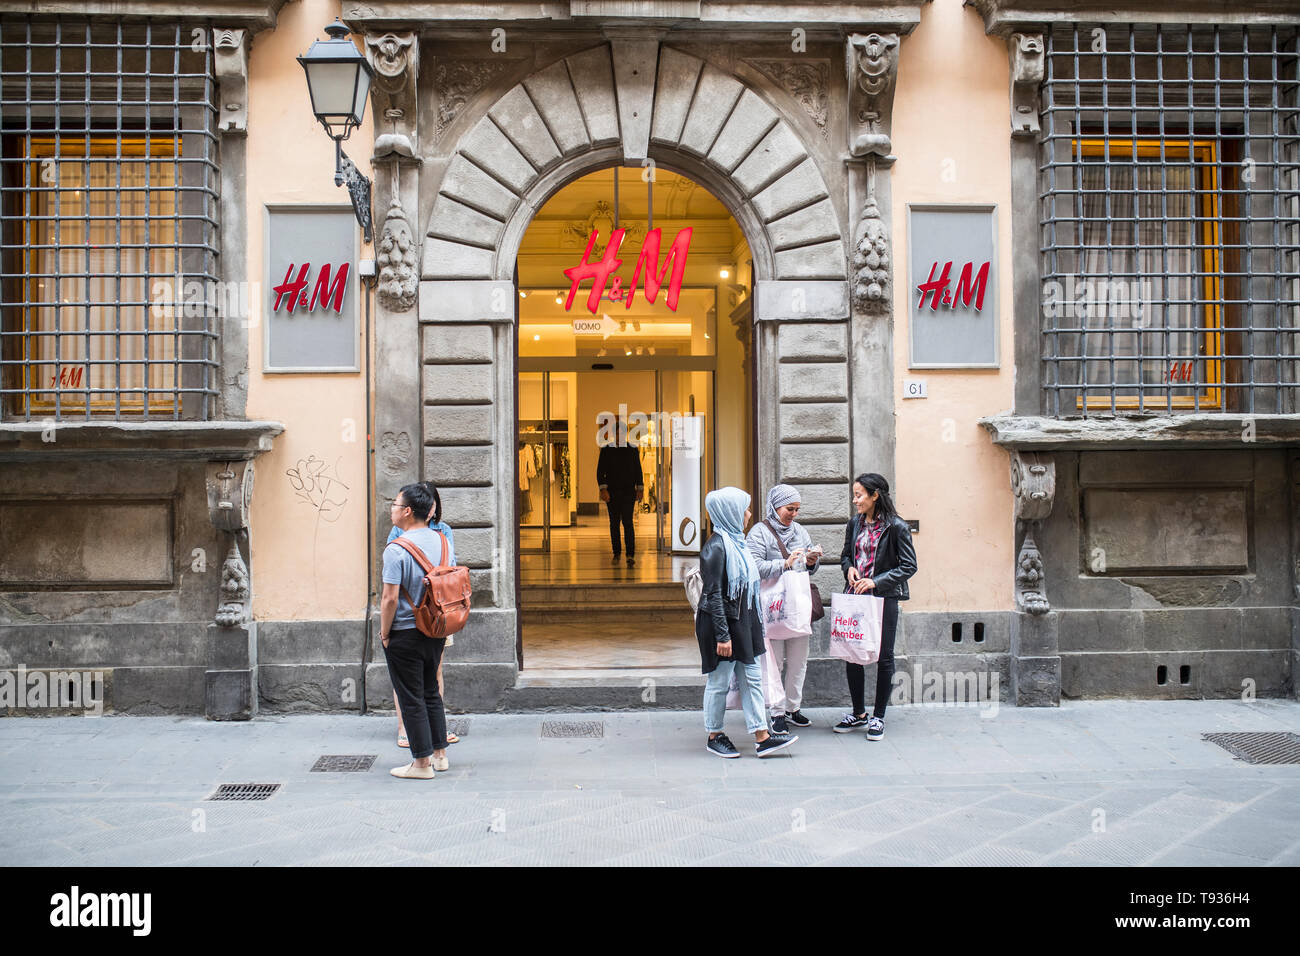 Pisa, H and M store in the city. Stock Photo